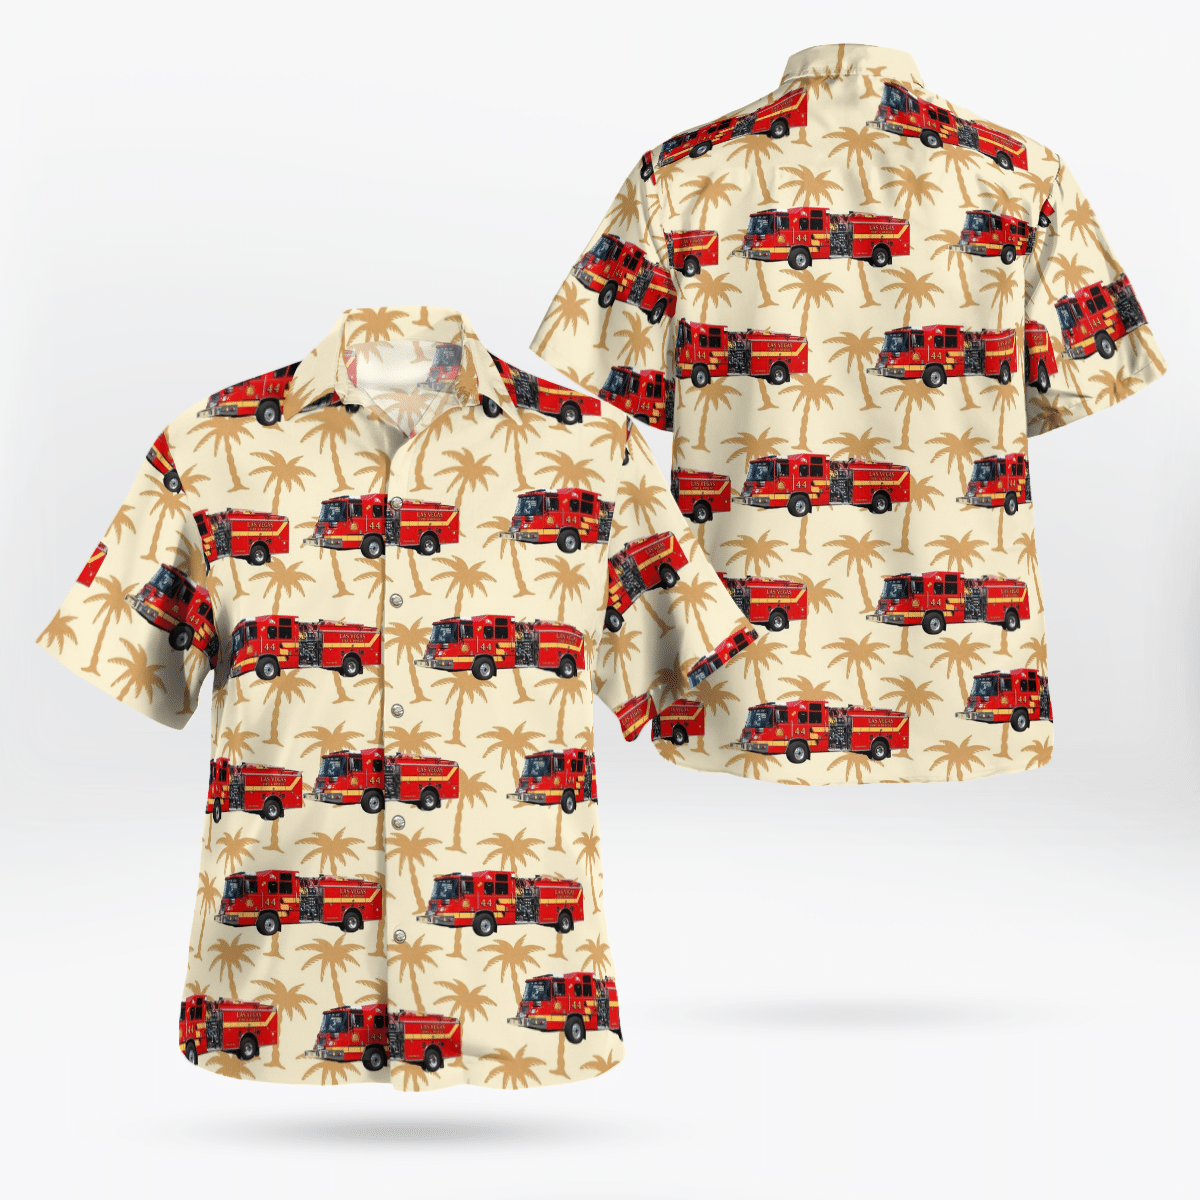 This Hawaiian Shirt Is A Great Way To Add A Splash Of Color To Your Wardrobe Word2